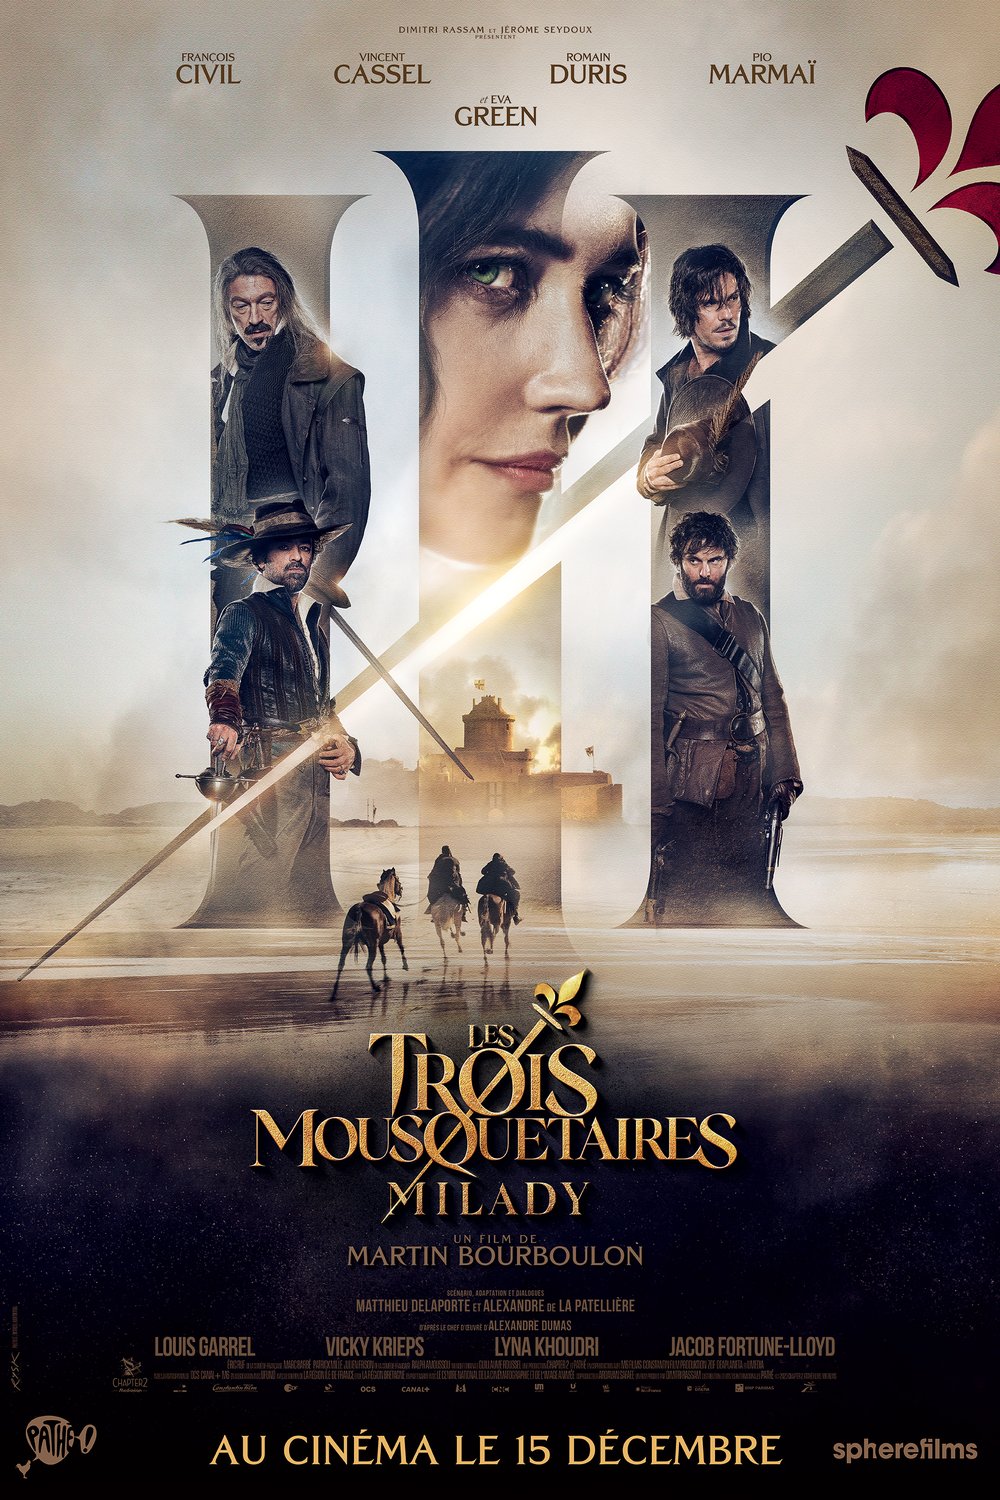 Poster of the movie Les trois mousquetaires: Milady